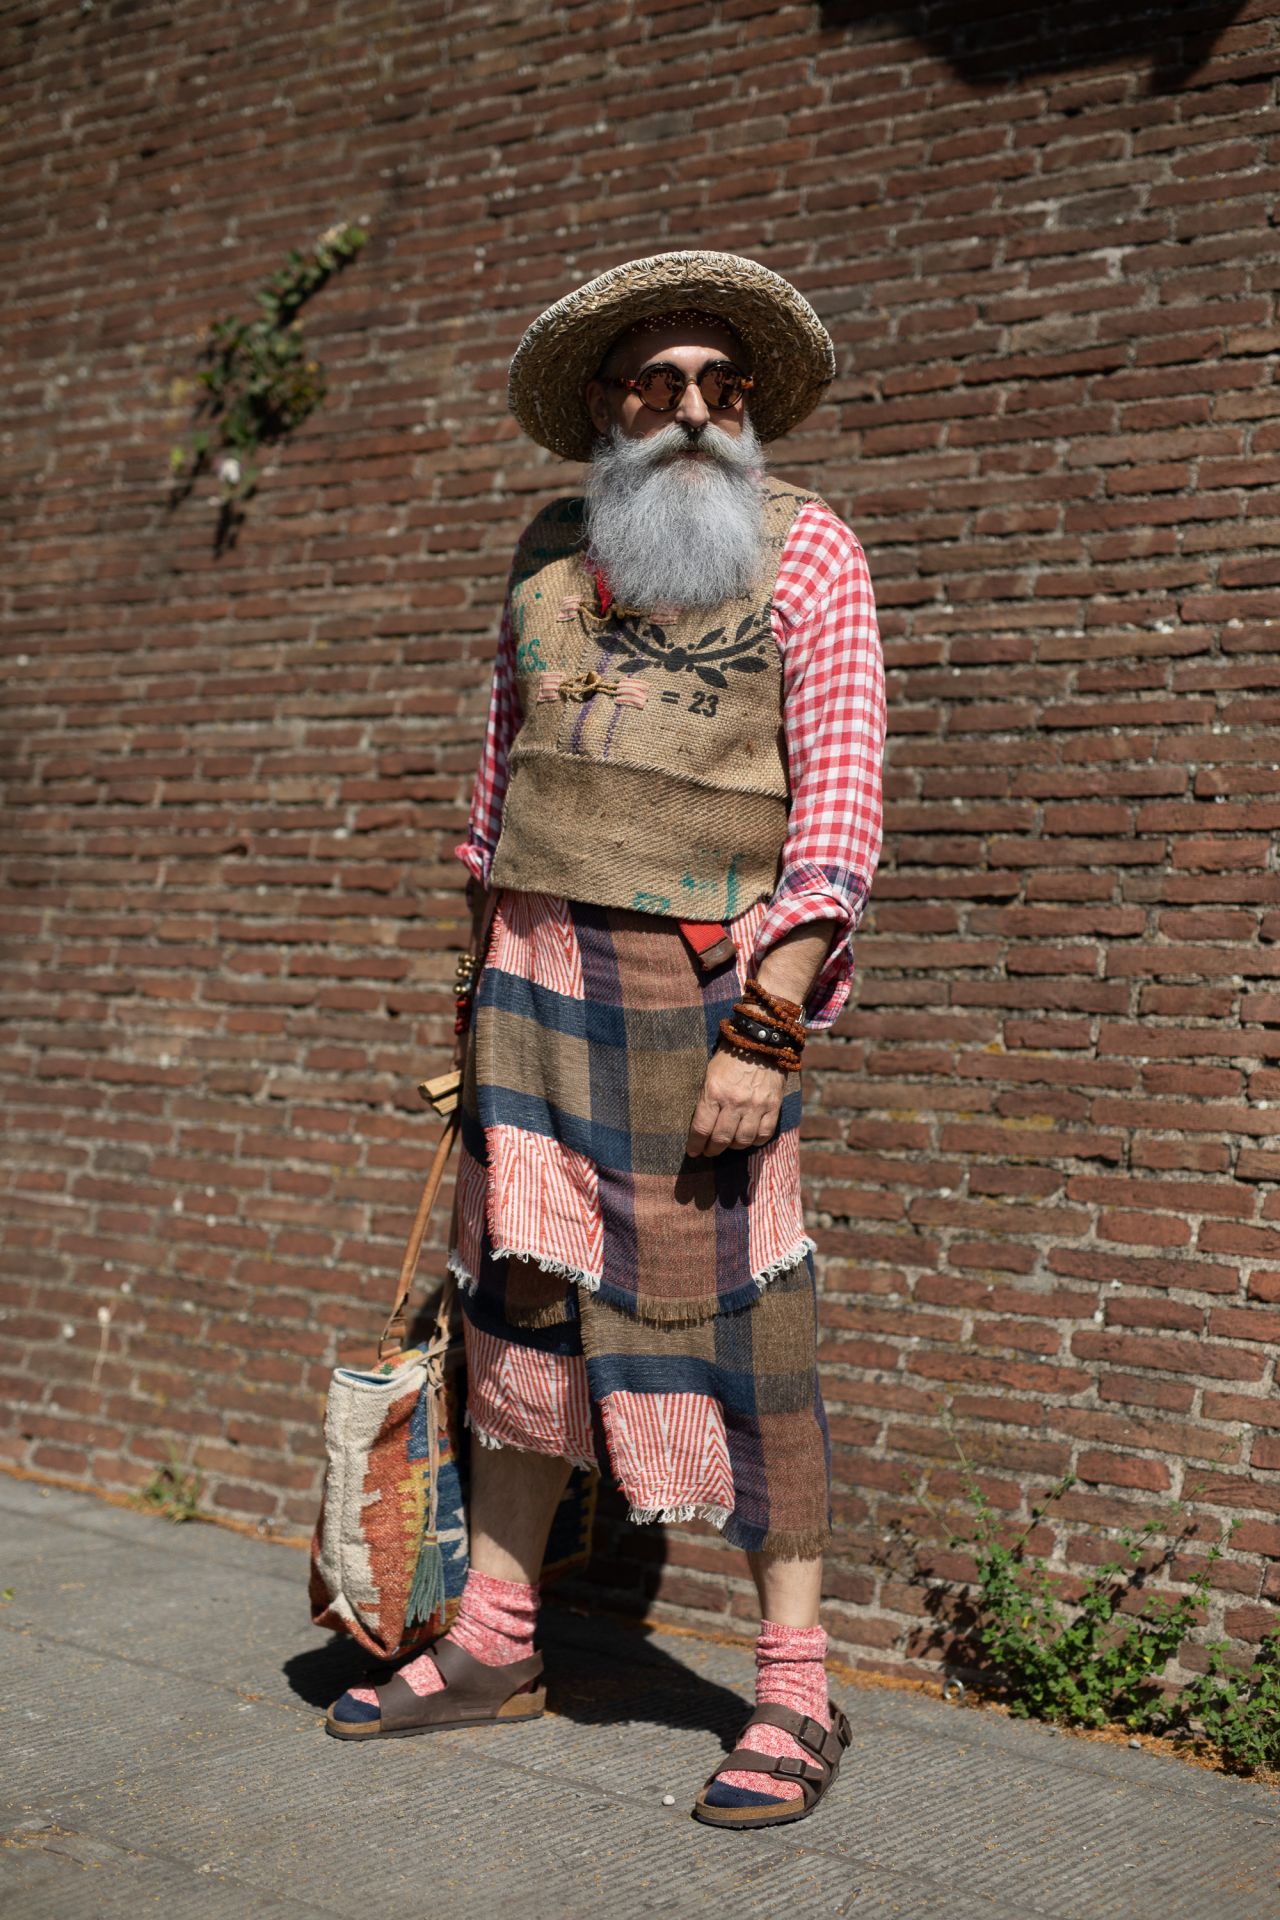 An attendee at the Pitti Uomo 94 fashion trade show in Florence.